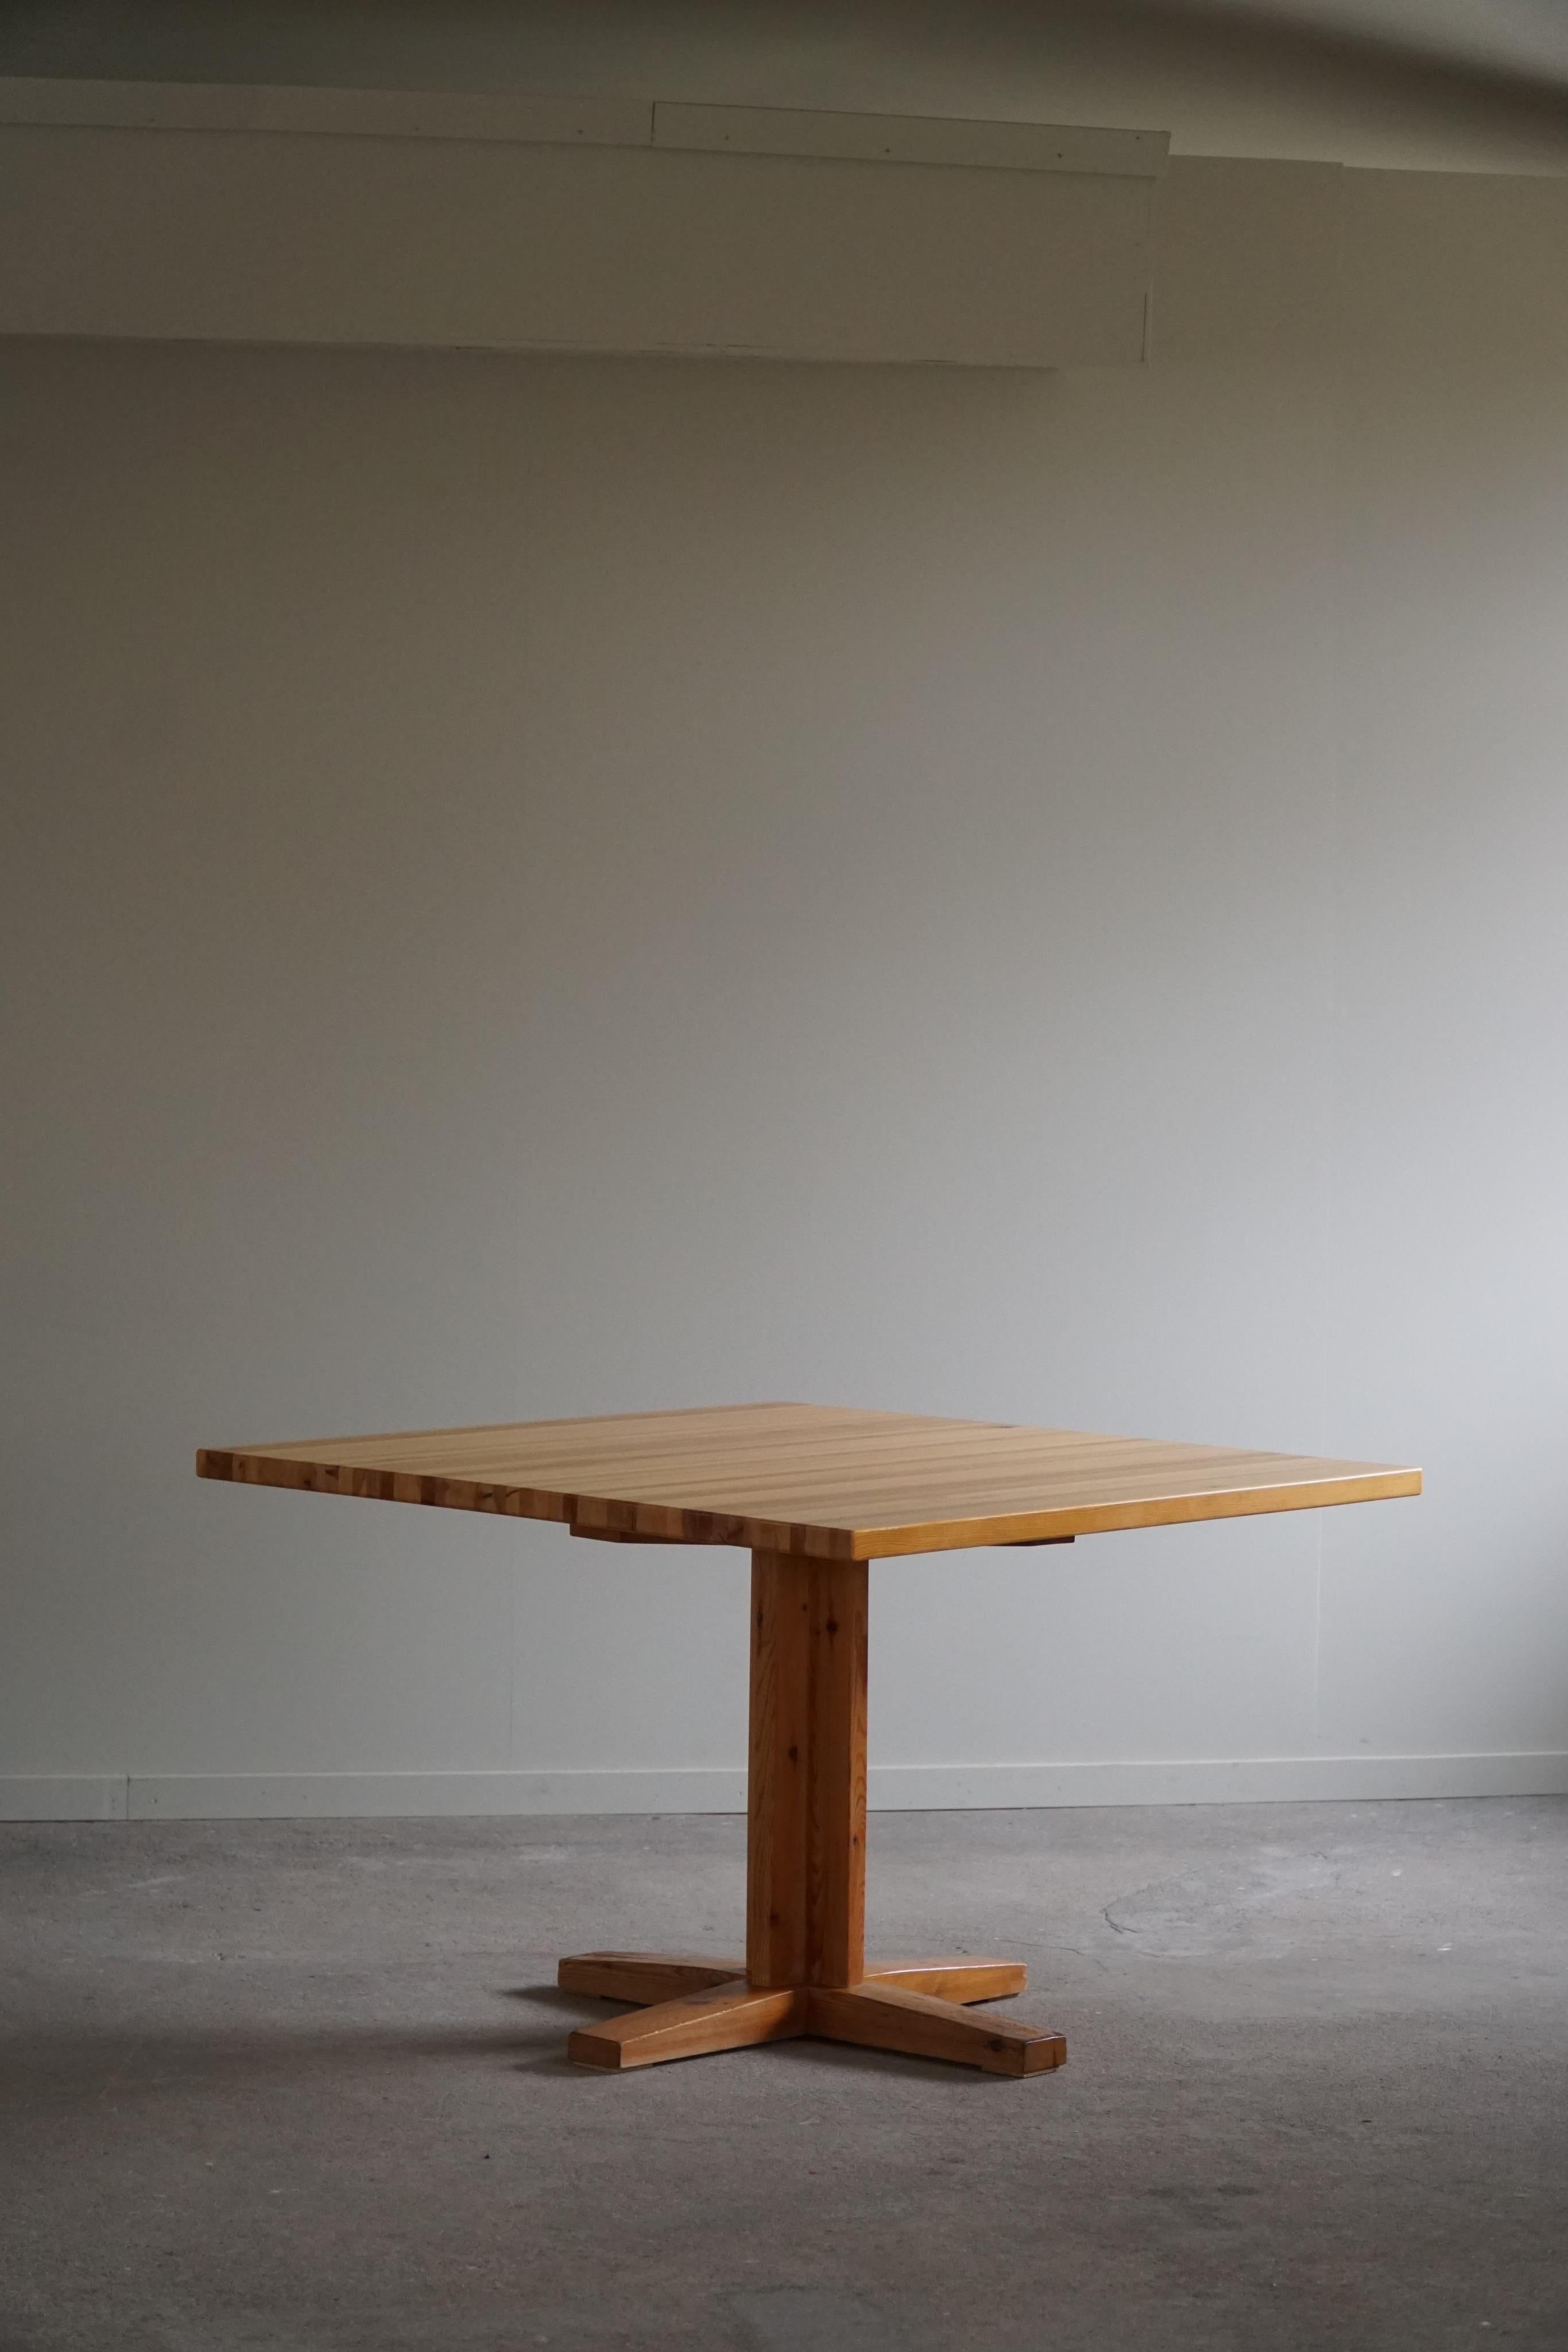 Midcentury Square Dining Room Table in Pine, Danish Cabinetmaker, 1970s For Sale 1